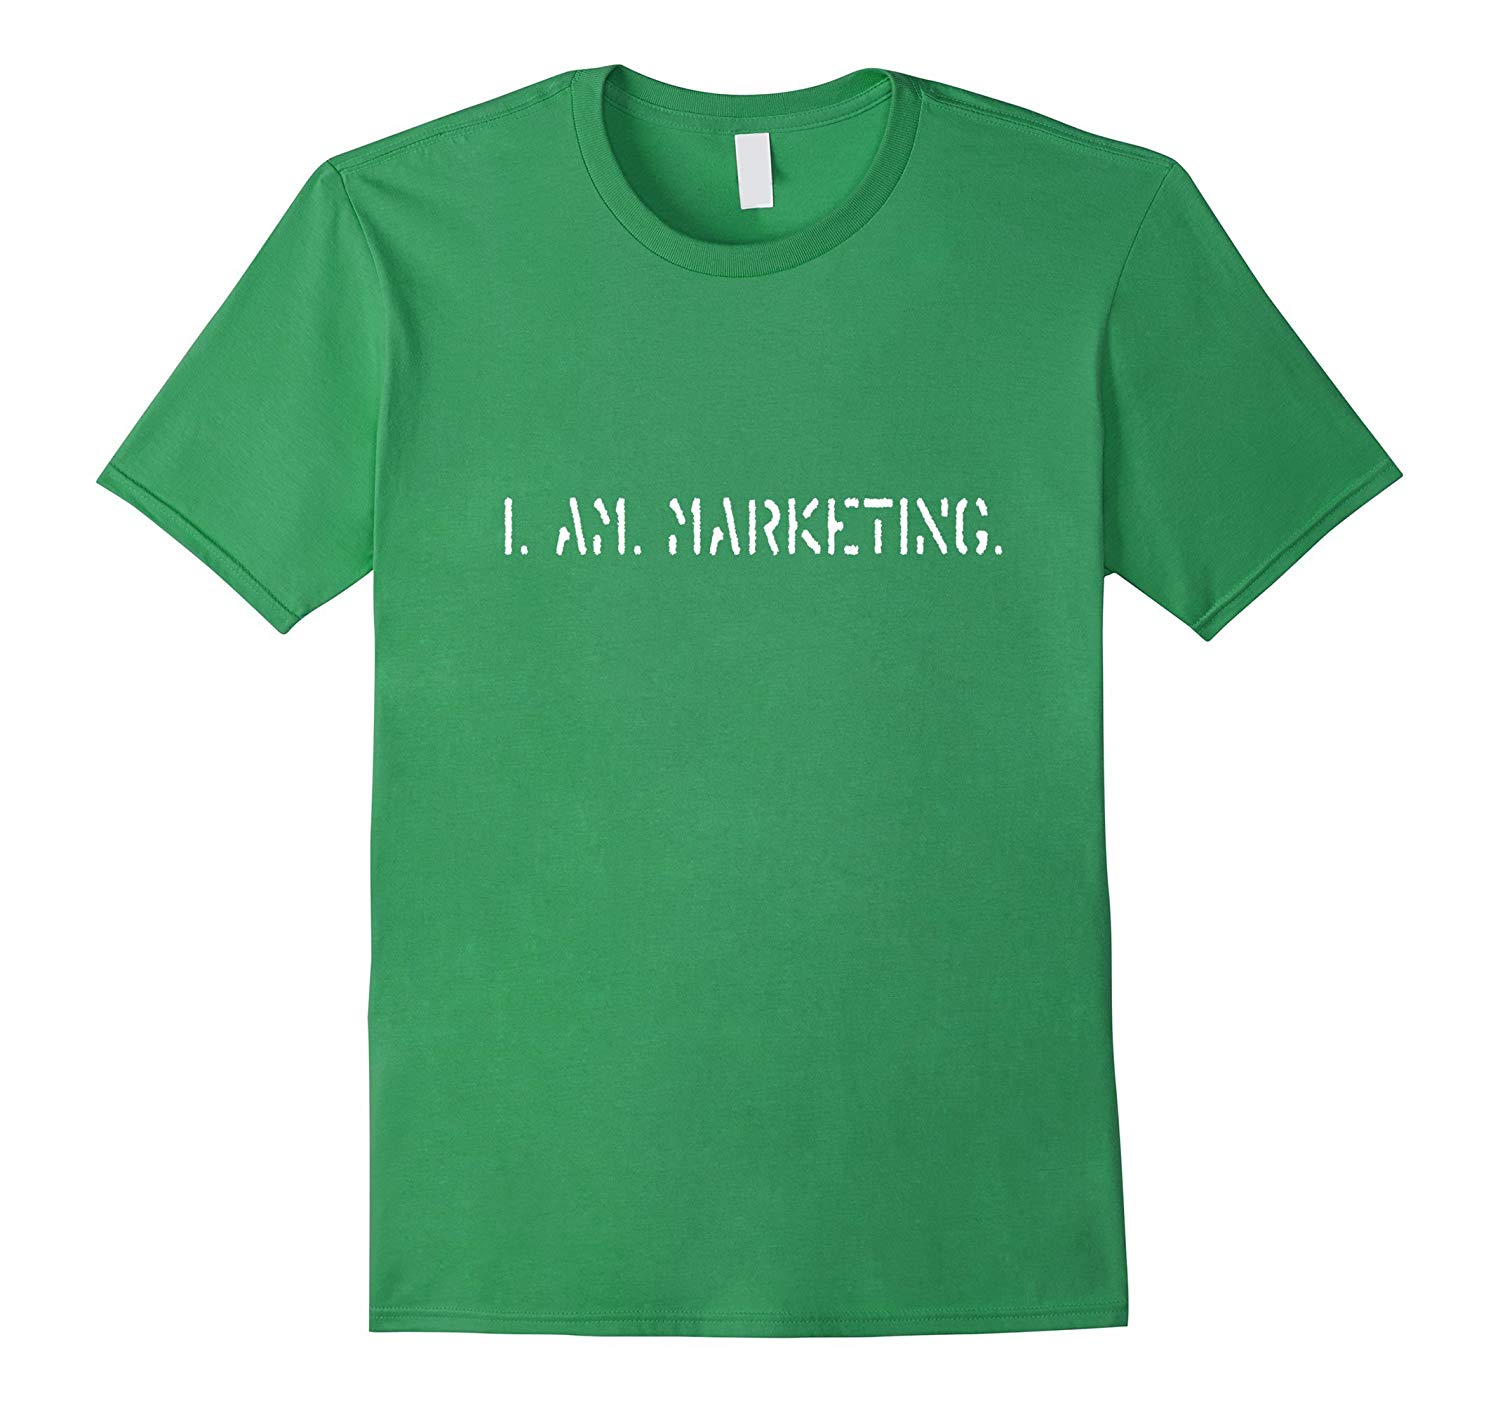 Green t-shirt that has I. AM. MARKETING. printed on it